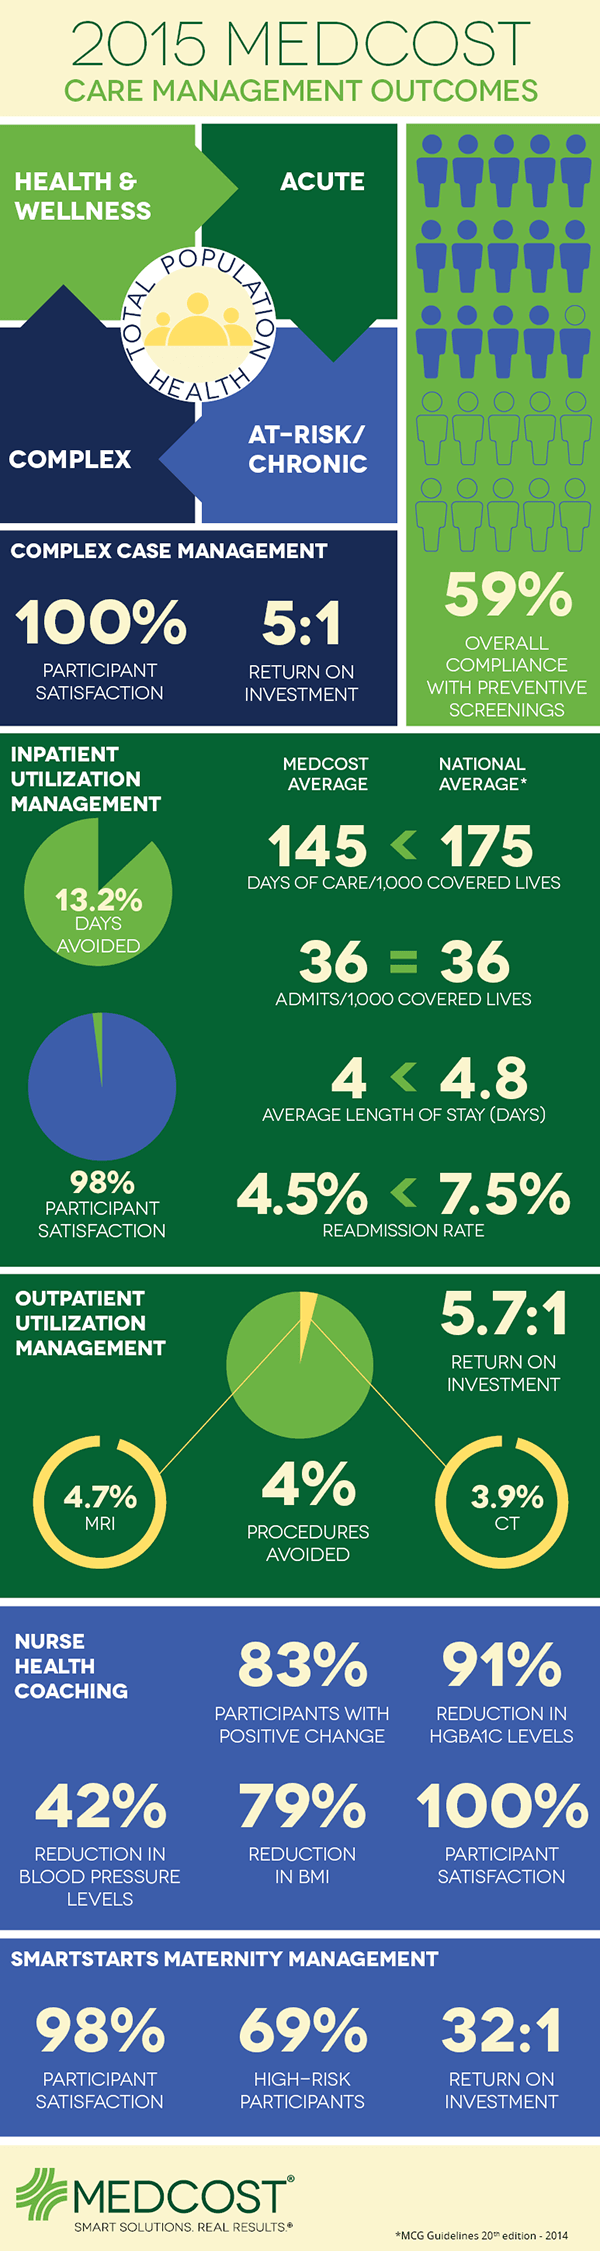 2015 MedCost Care Management Outcomes